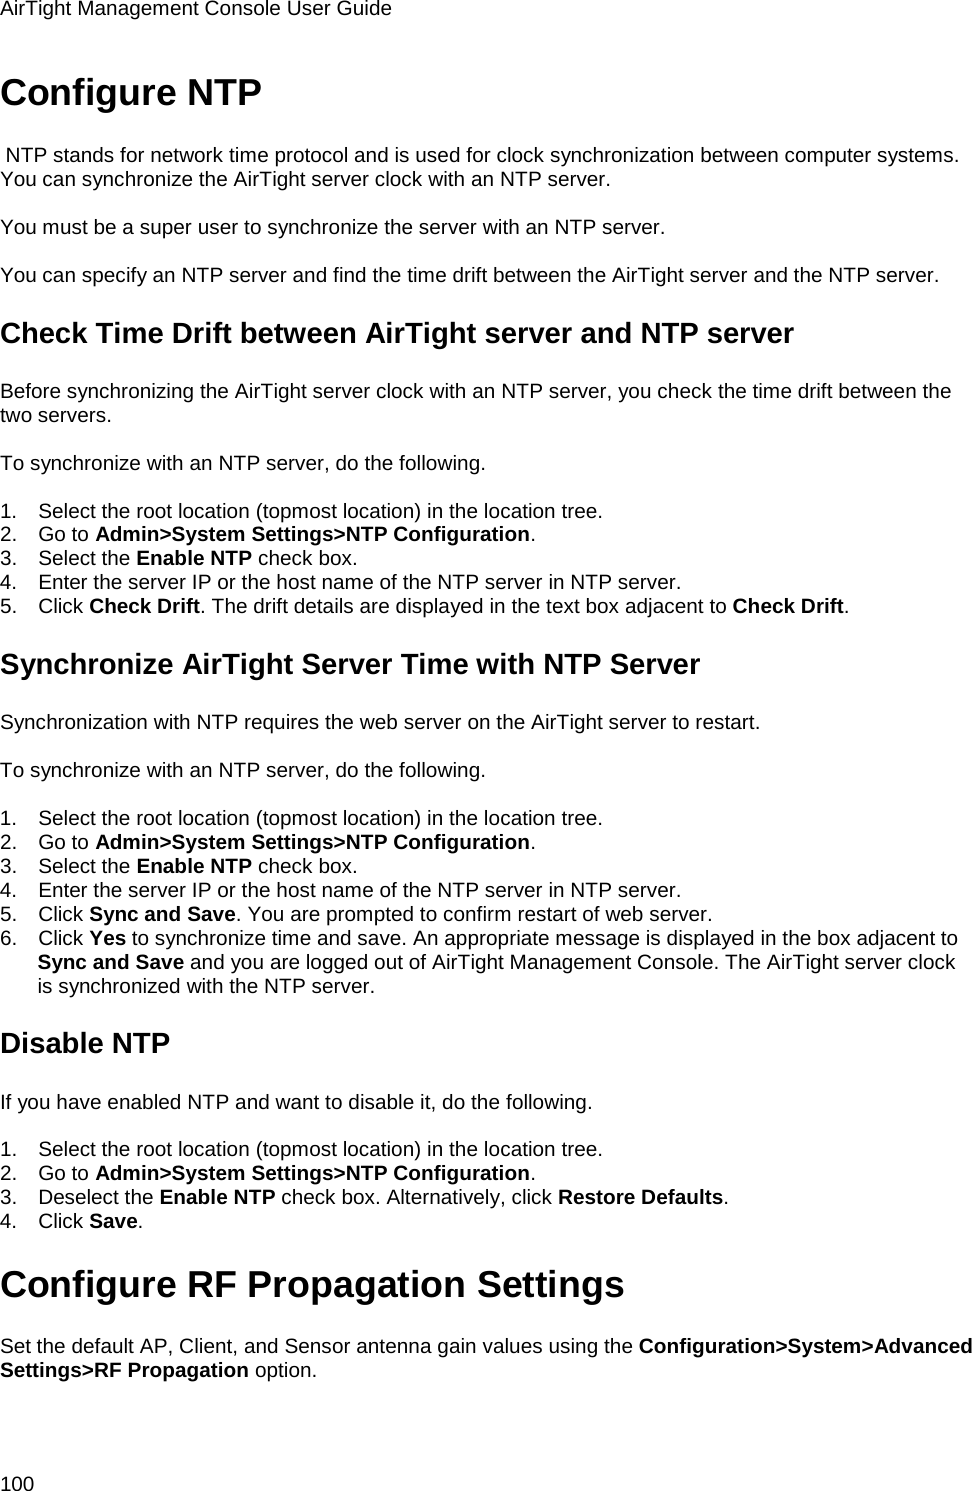 AirTight Management Console User Guide 100 Configure NTP  NTP stands for network time protocol and is used for clock synchronization between computer systems. You can synchronize the AirTight server clock with an NTP server.   You must be a super user to synchronize the server with an NTP server.   You can specify an NTP server and find the time drift between the AirTight server and the NTP server. Check Time Drift between AirTight server and NTP server Before synchronizing the AirTight server clock with an NTP server, you check the time drift between the two servers.   To synchronize with an NTP server, do the following.   1.      Select the root location (topmost location) in the location tree. 2.      Go to Admin&gt;System Settings&gt;NTP Configuration. 3.      Select the Enable NTP check box. 4.      Enter the server IP or the host name of the NTP server in NTP server. 5.      Click Check Drift. The drift details are displayed in the text box adjacent to Check Drift. Synchronize AirTight Server Time with NTP Server Synchronization with NTP requires the web server on the AirTight server to restart.   To synchronize with an NTP server, do the following.   1.      Select the root location (topmost location) in the location tree. 2.      Go to Admin&gt;System Settings&gt;NTP Configuration. 3.      Select the Enable NTP check box. 4.      Enter the server IP or the host name of the NTP server in NTP server. 5.      Click Sync and Save. You are prompted to confirm restart of web server. 6.      Click Yes to synchronize time and save. An appropriate message is displayed in the box adjacent to Sync and Save and you are logged out of AirTight Management Console. The AirTight server clock is synchronized with the NTP server. Disable NTP If you have enabled NTP and want to disable it, do the following.   1.      Select the root location (topmost location) in the location tree. 2.      Go to Admin&gt;System Settings&gt;NTP Configuration. 3.      Deselect the Enable NTP check box. Alternatively, click Restore Defaults. 4.      Click Save. Configure RF Propagation Settings Set the default AP, Client, and Sensor antenna gain values using the Configuration&gt;System&gt;Advanced Settings&gt;RF Propagation option.   